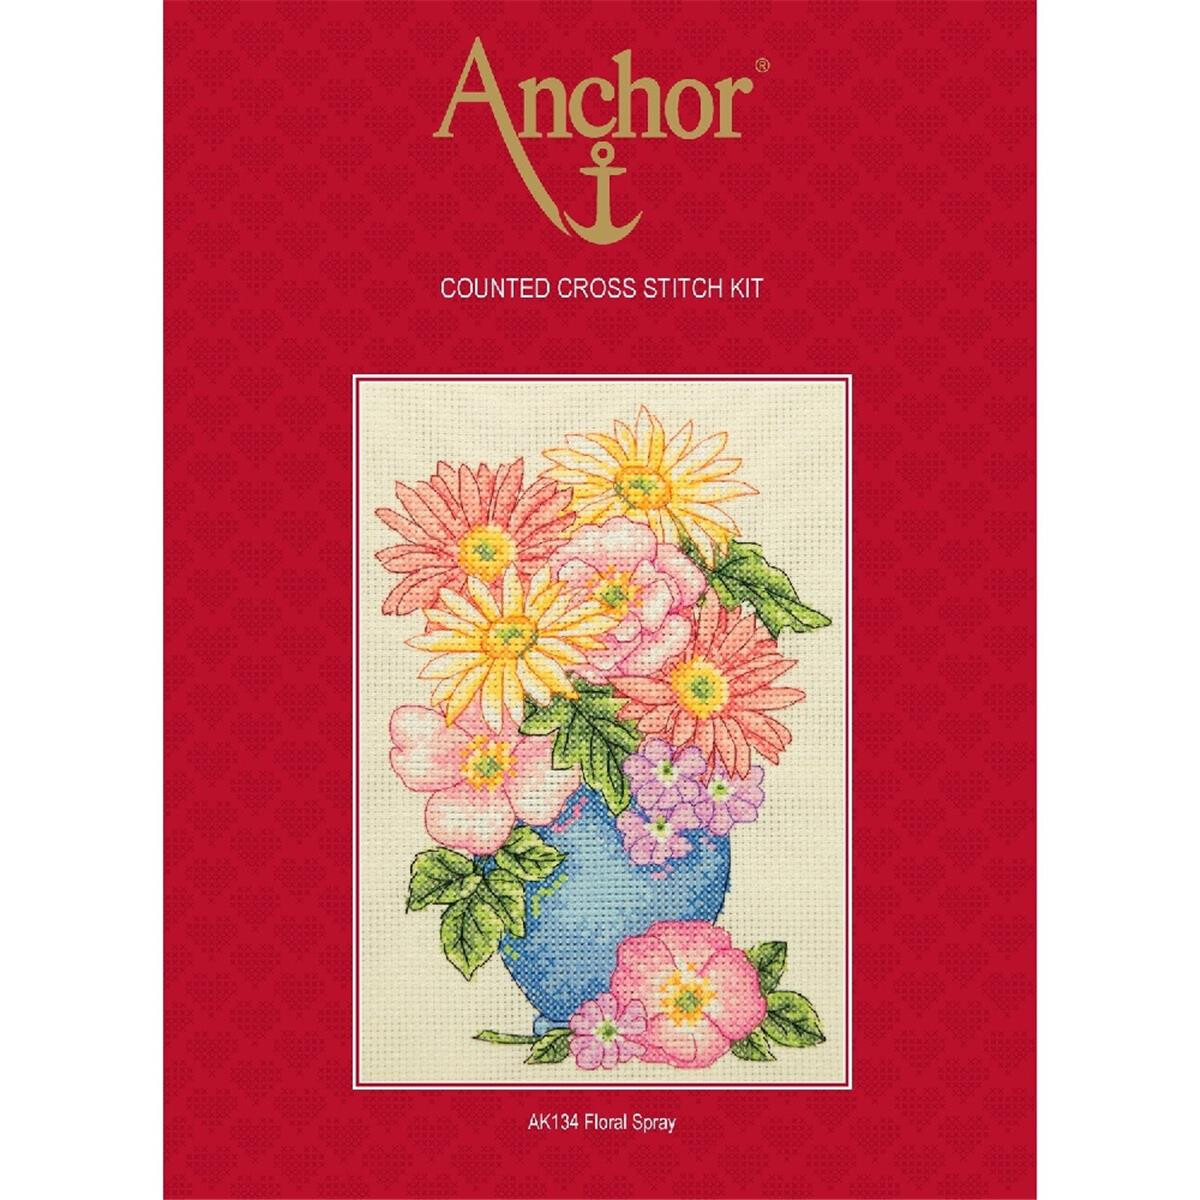 Anchor counted Cross Stitch kit "Floral Spray",...